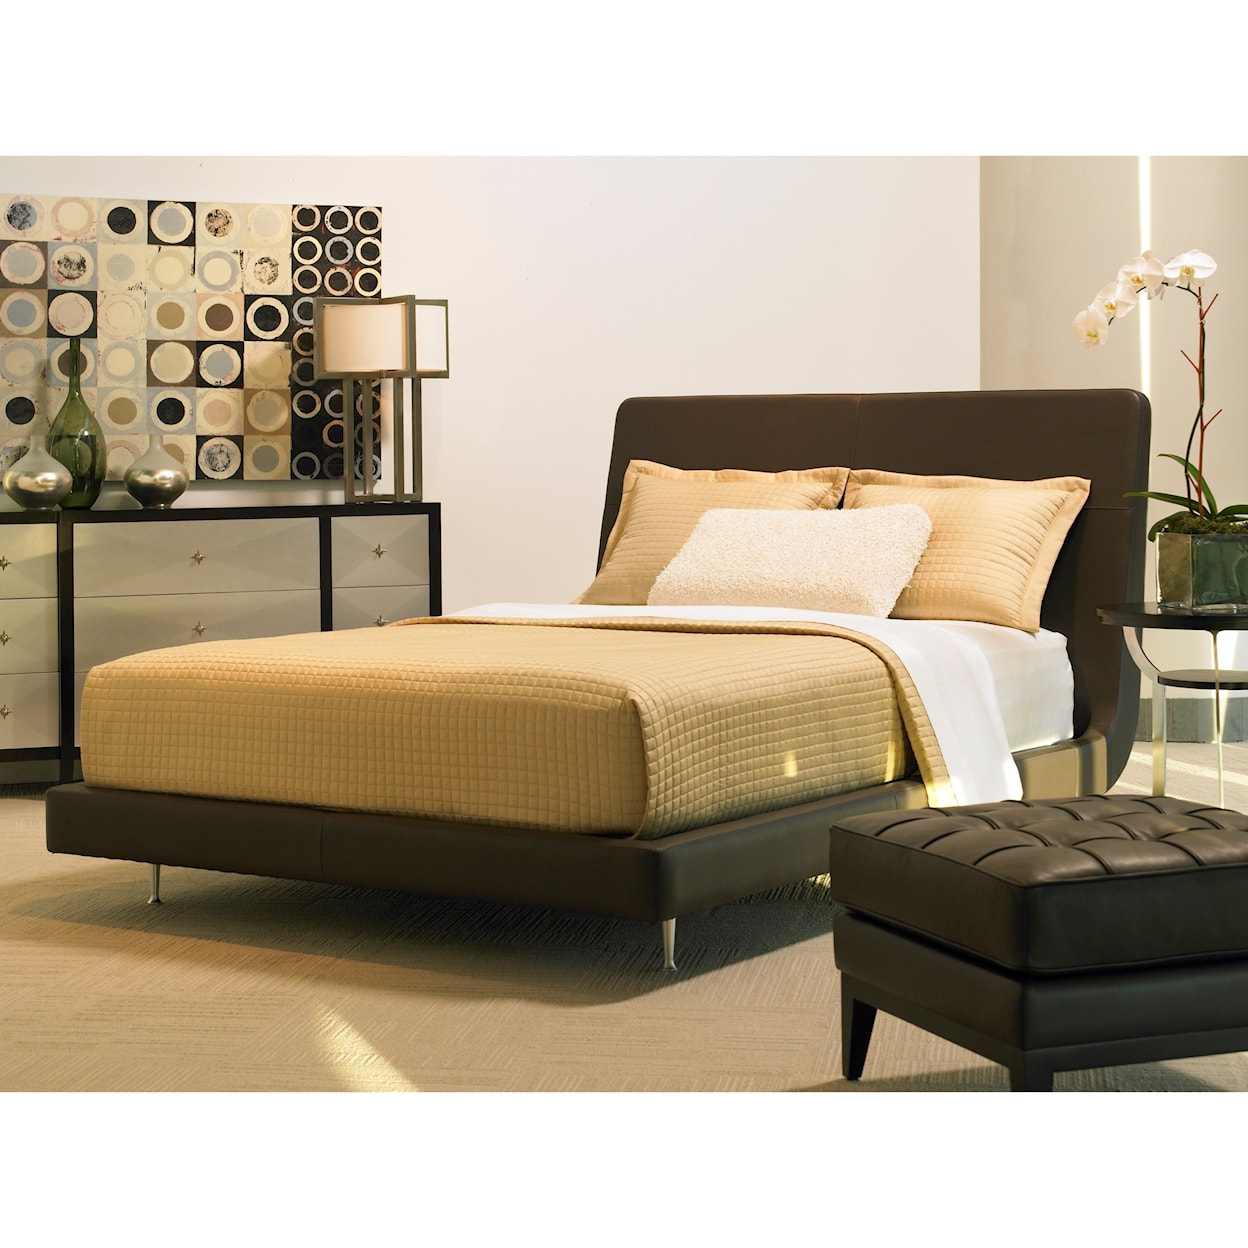 American Leather Menlo Park Bed Queen Upholstered Bed